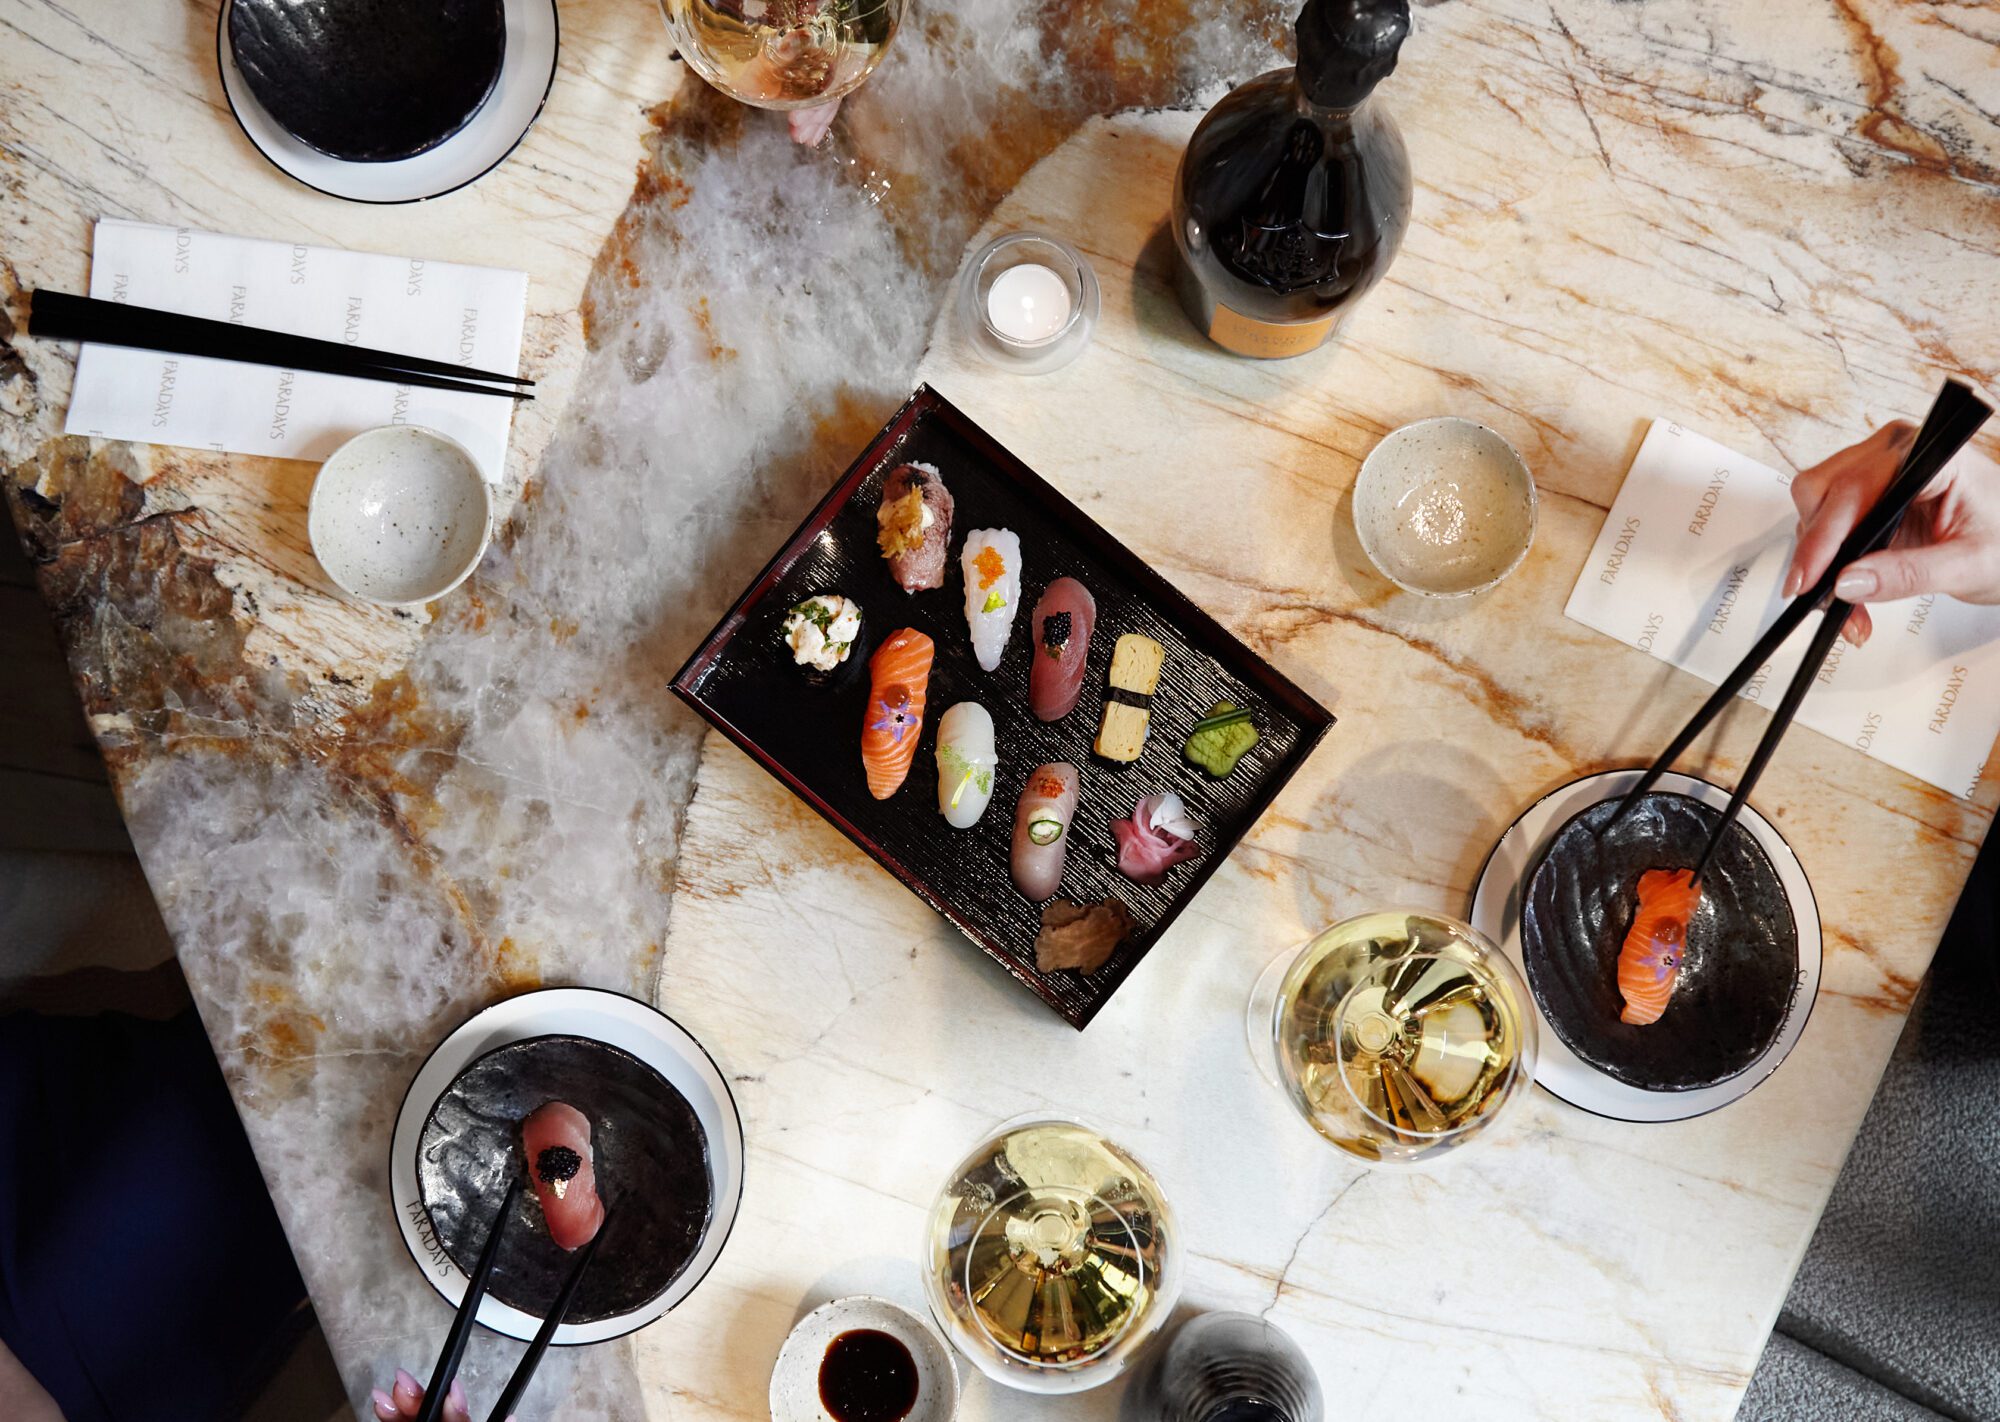 Head to Faraday’s Bar on Sundays for a decadent nigiri and champagne experience